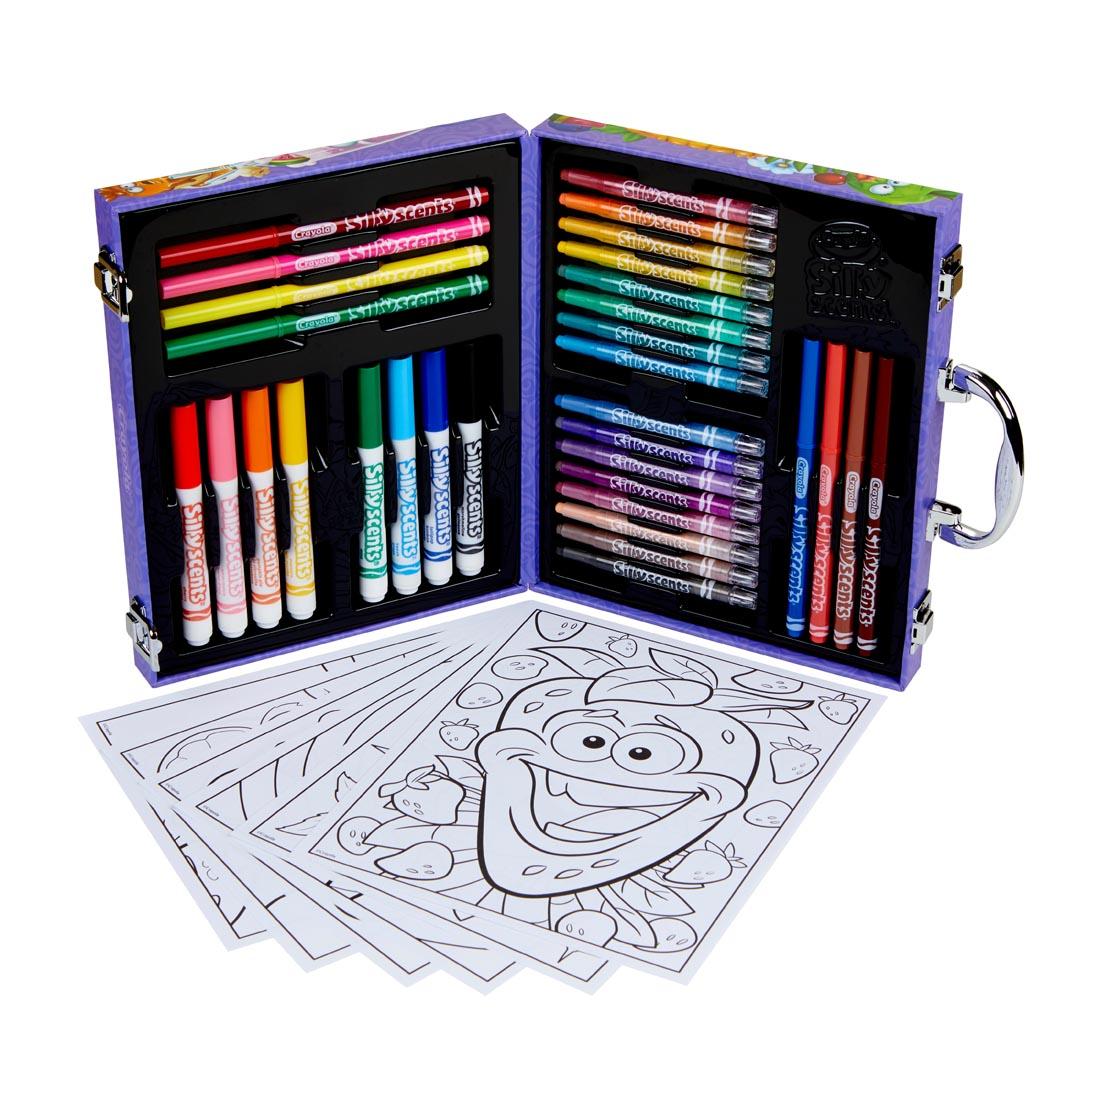 Crayola Silly Scents Sweet Mini Art Case opened to show contents